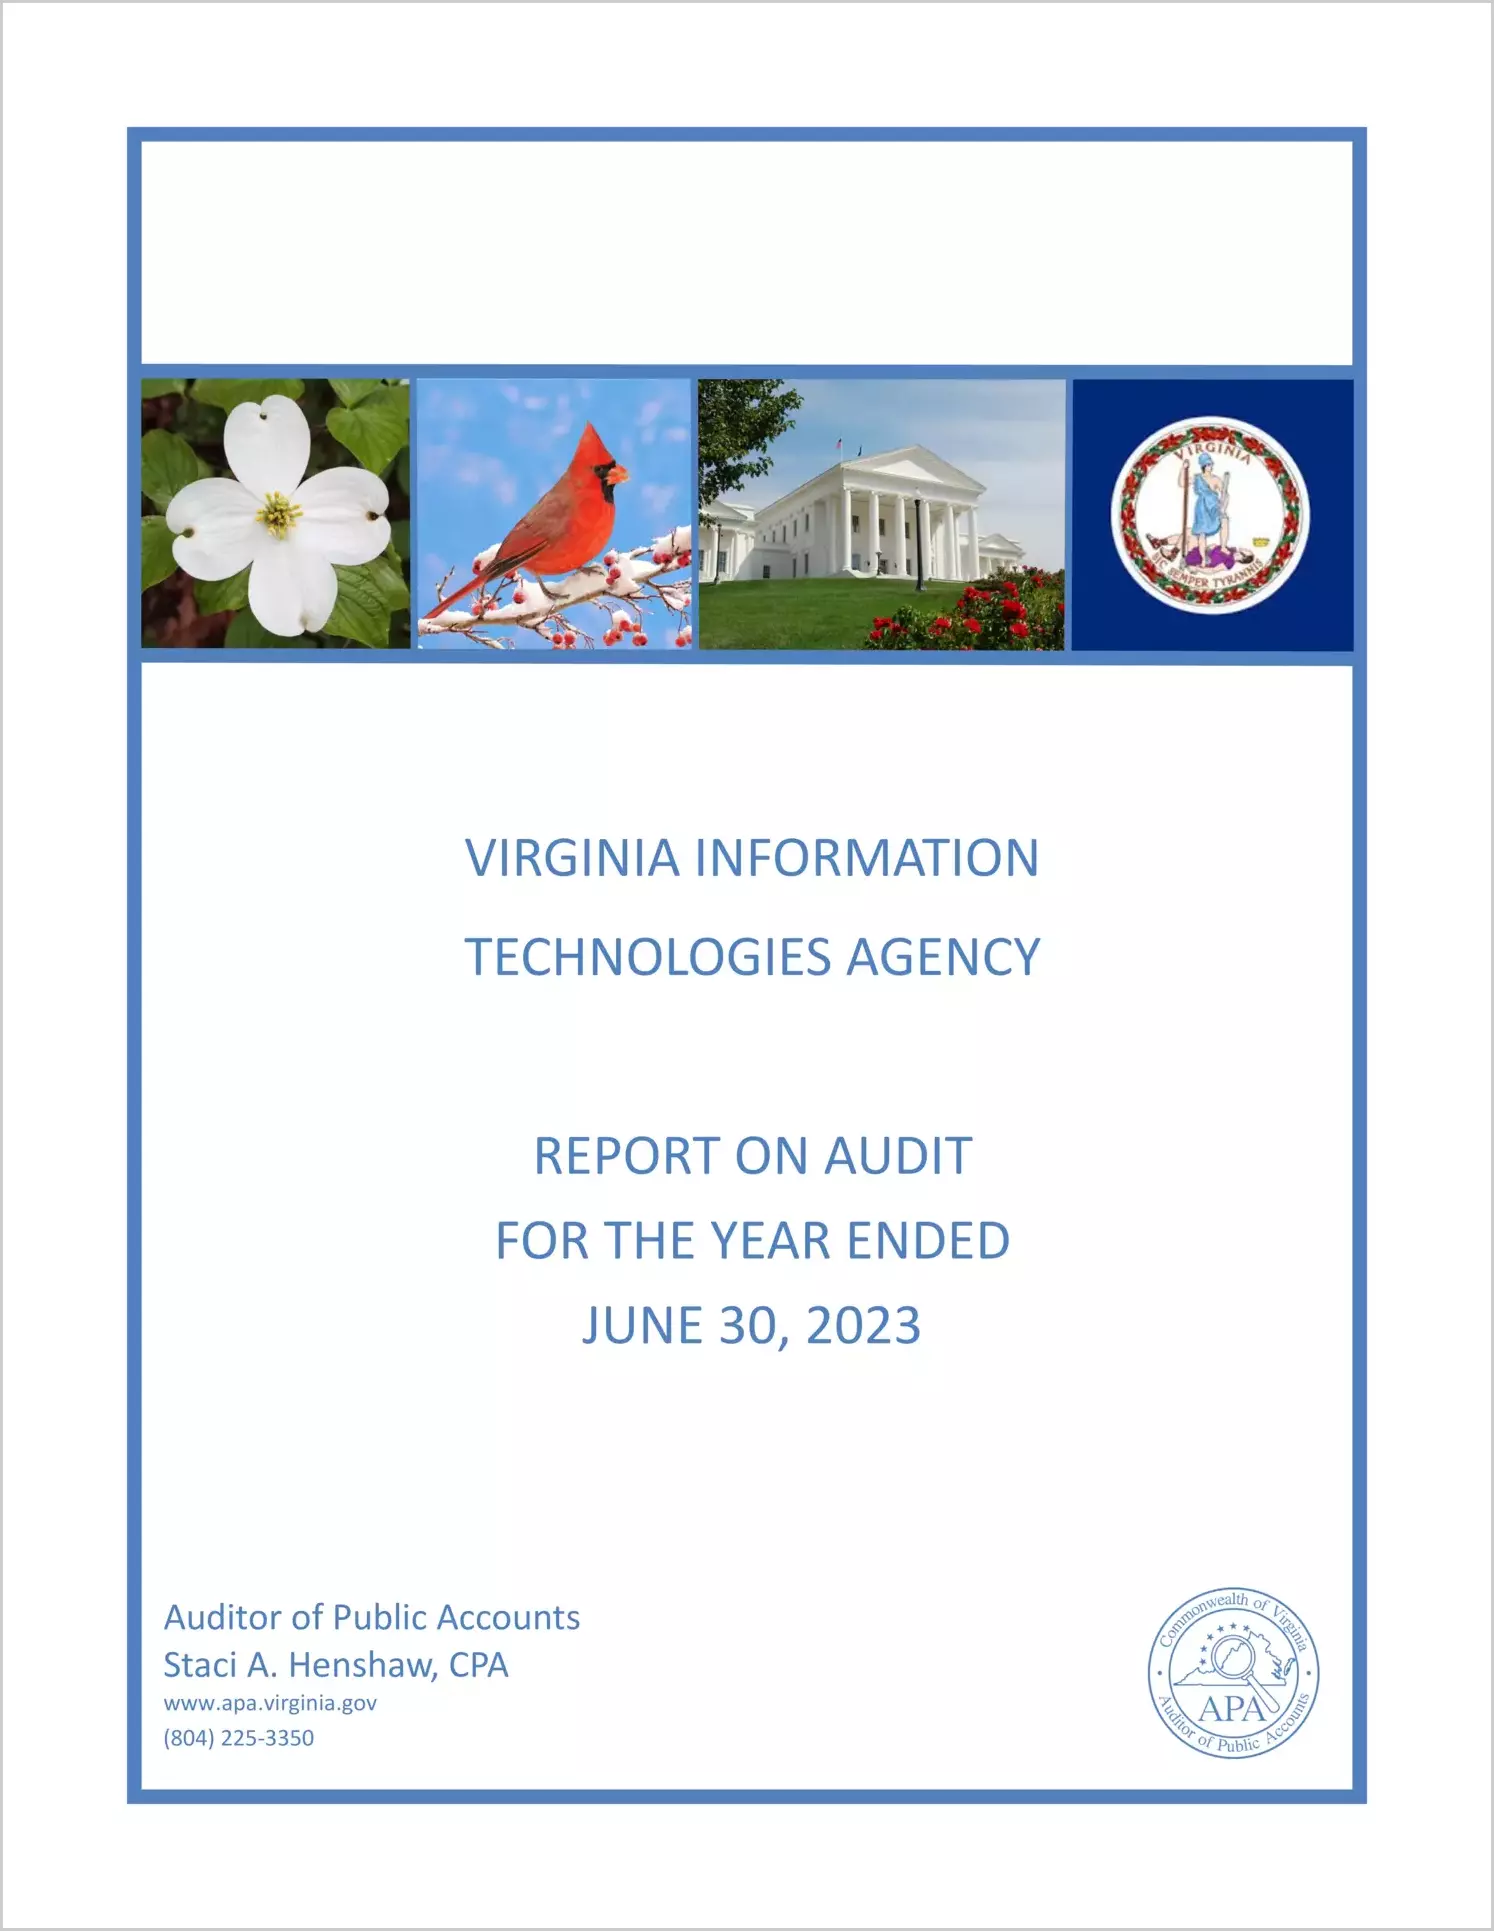 Virginia Information Technologies Agency for the year ended June 30, 2023